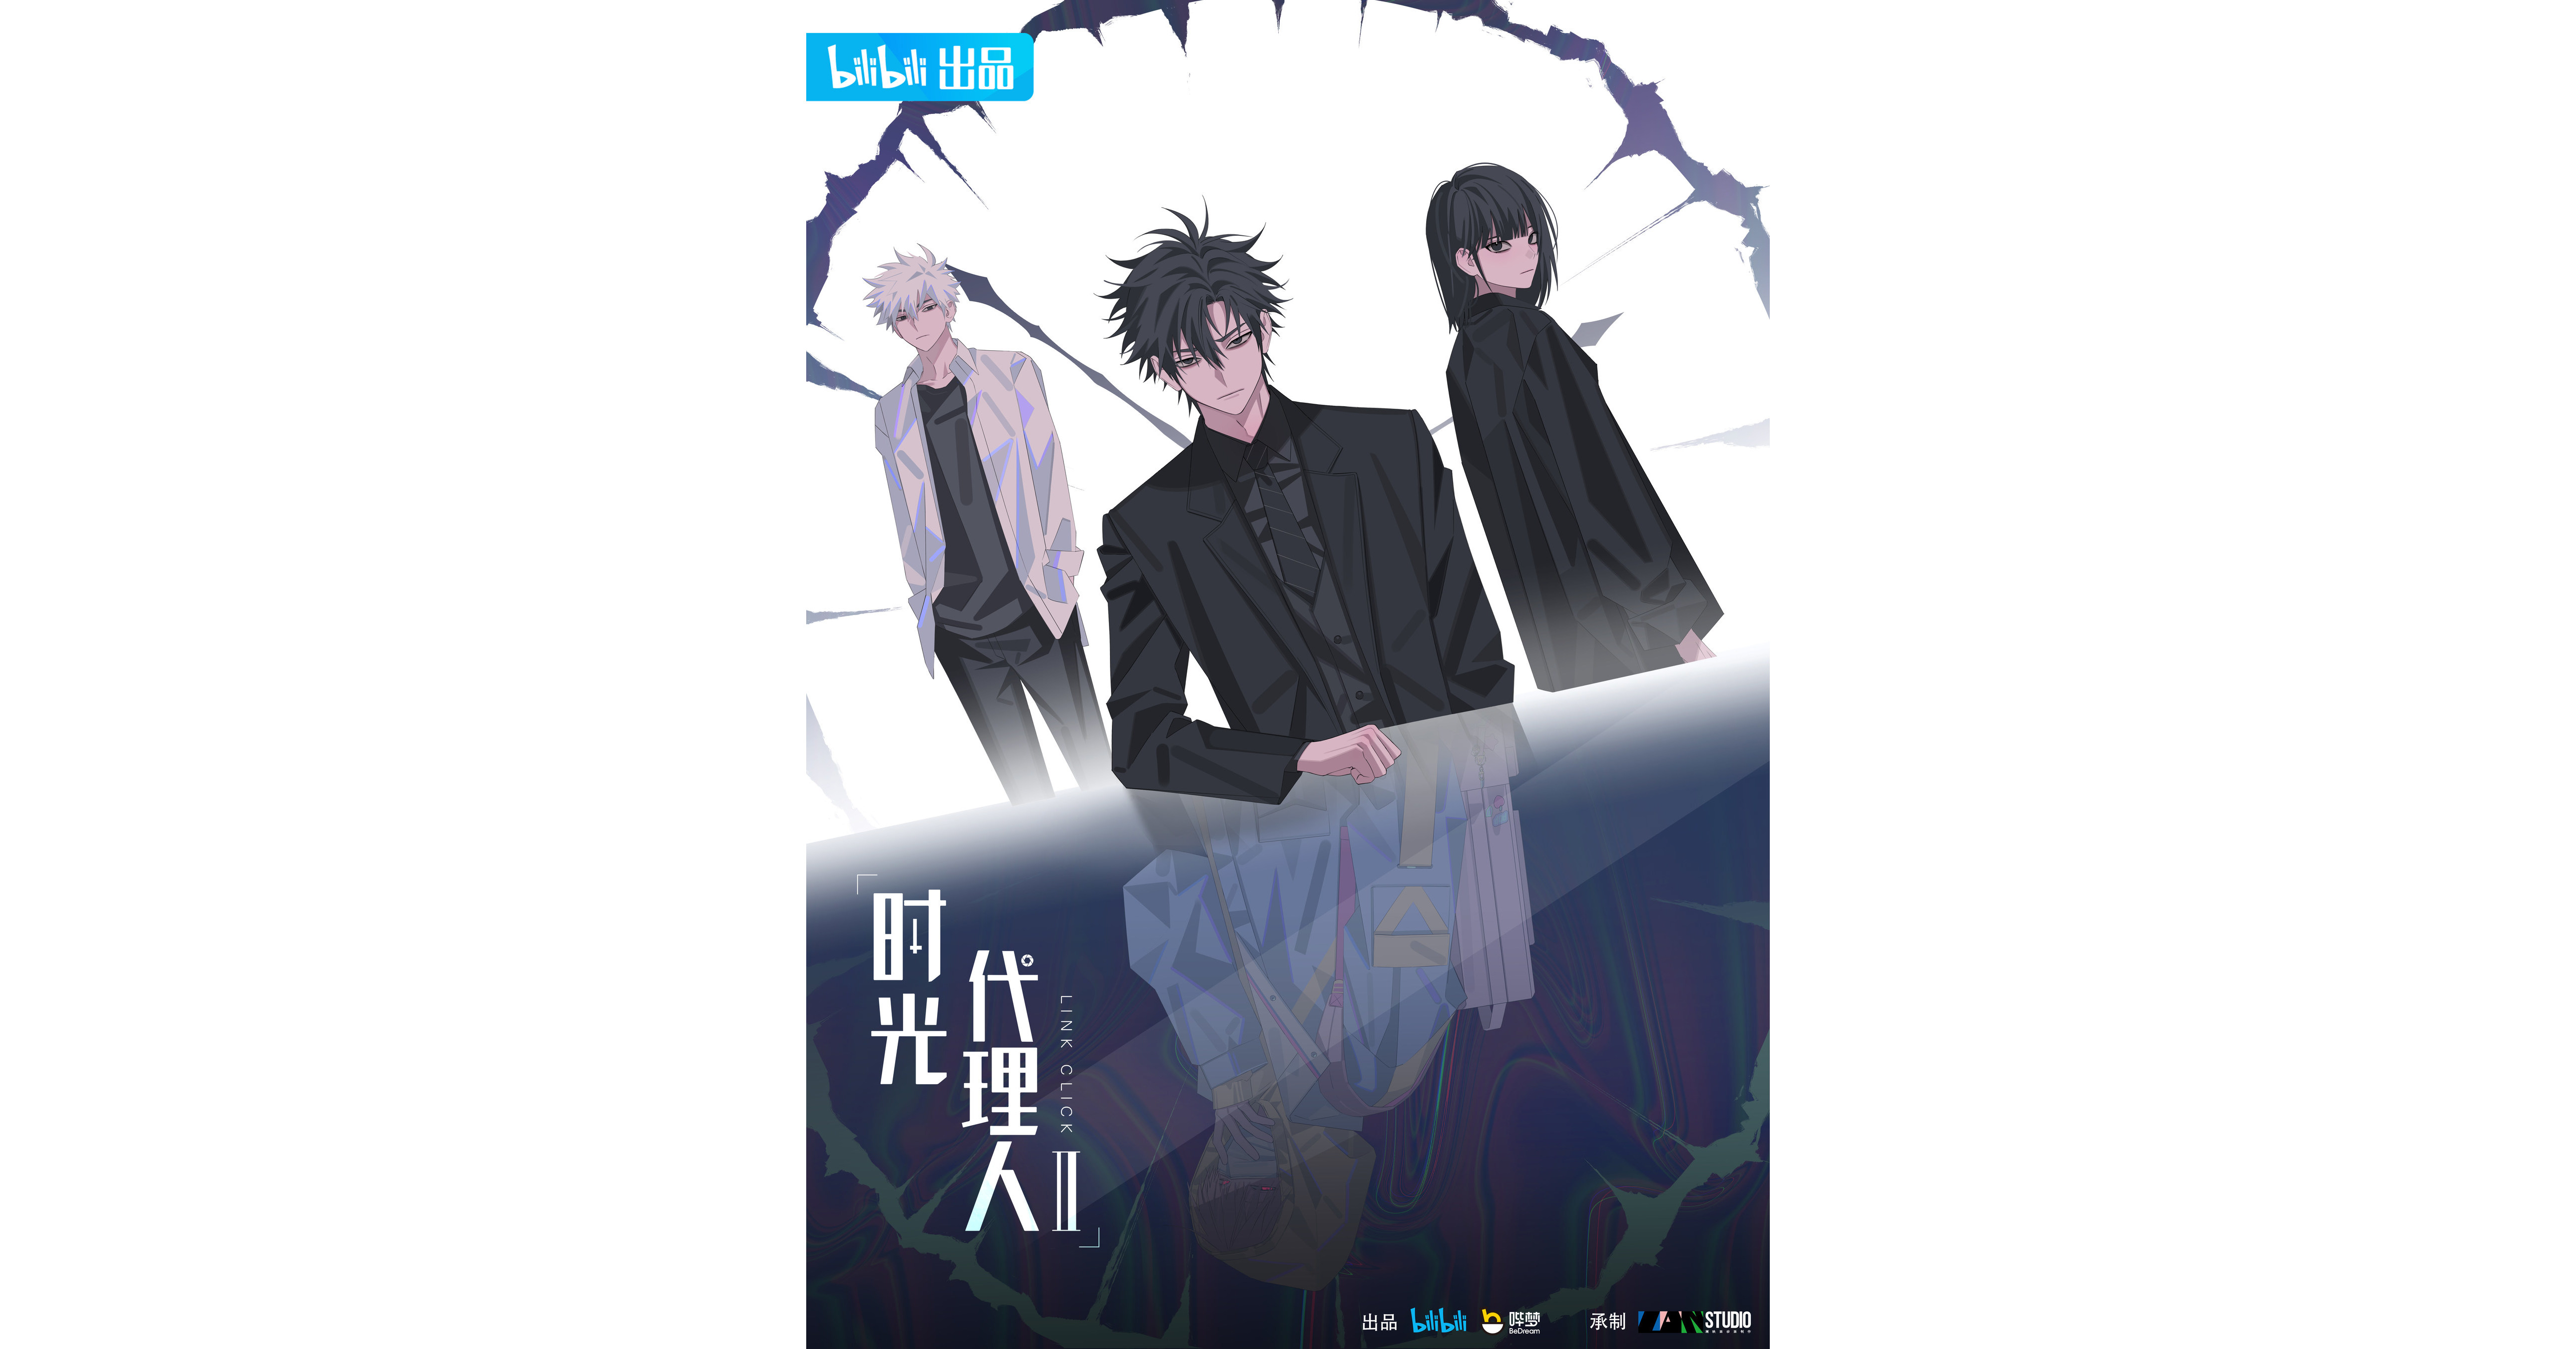 Bilibili-Produced The Three-Body Problem Animated Series Will Debut on  December 3rd, 2022